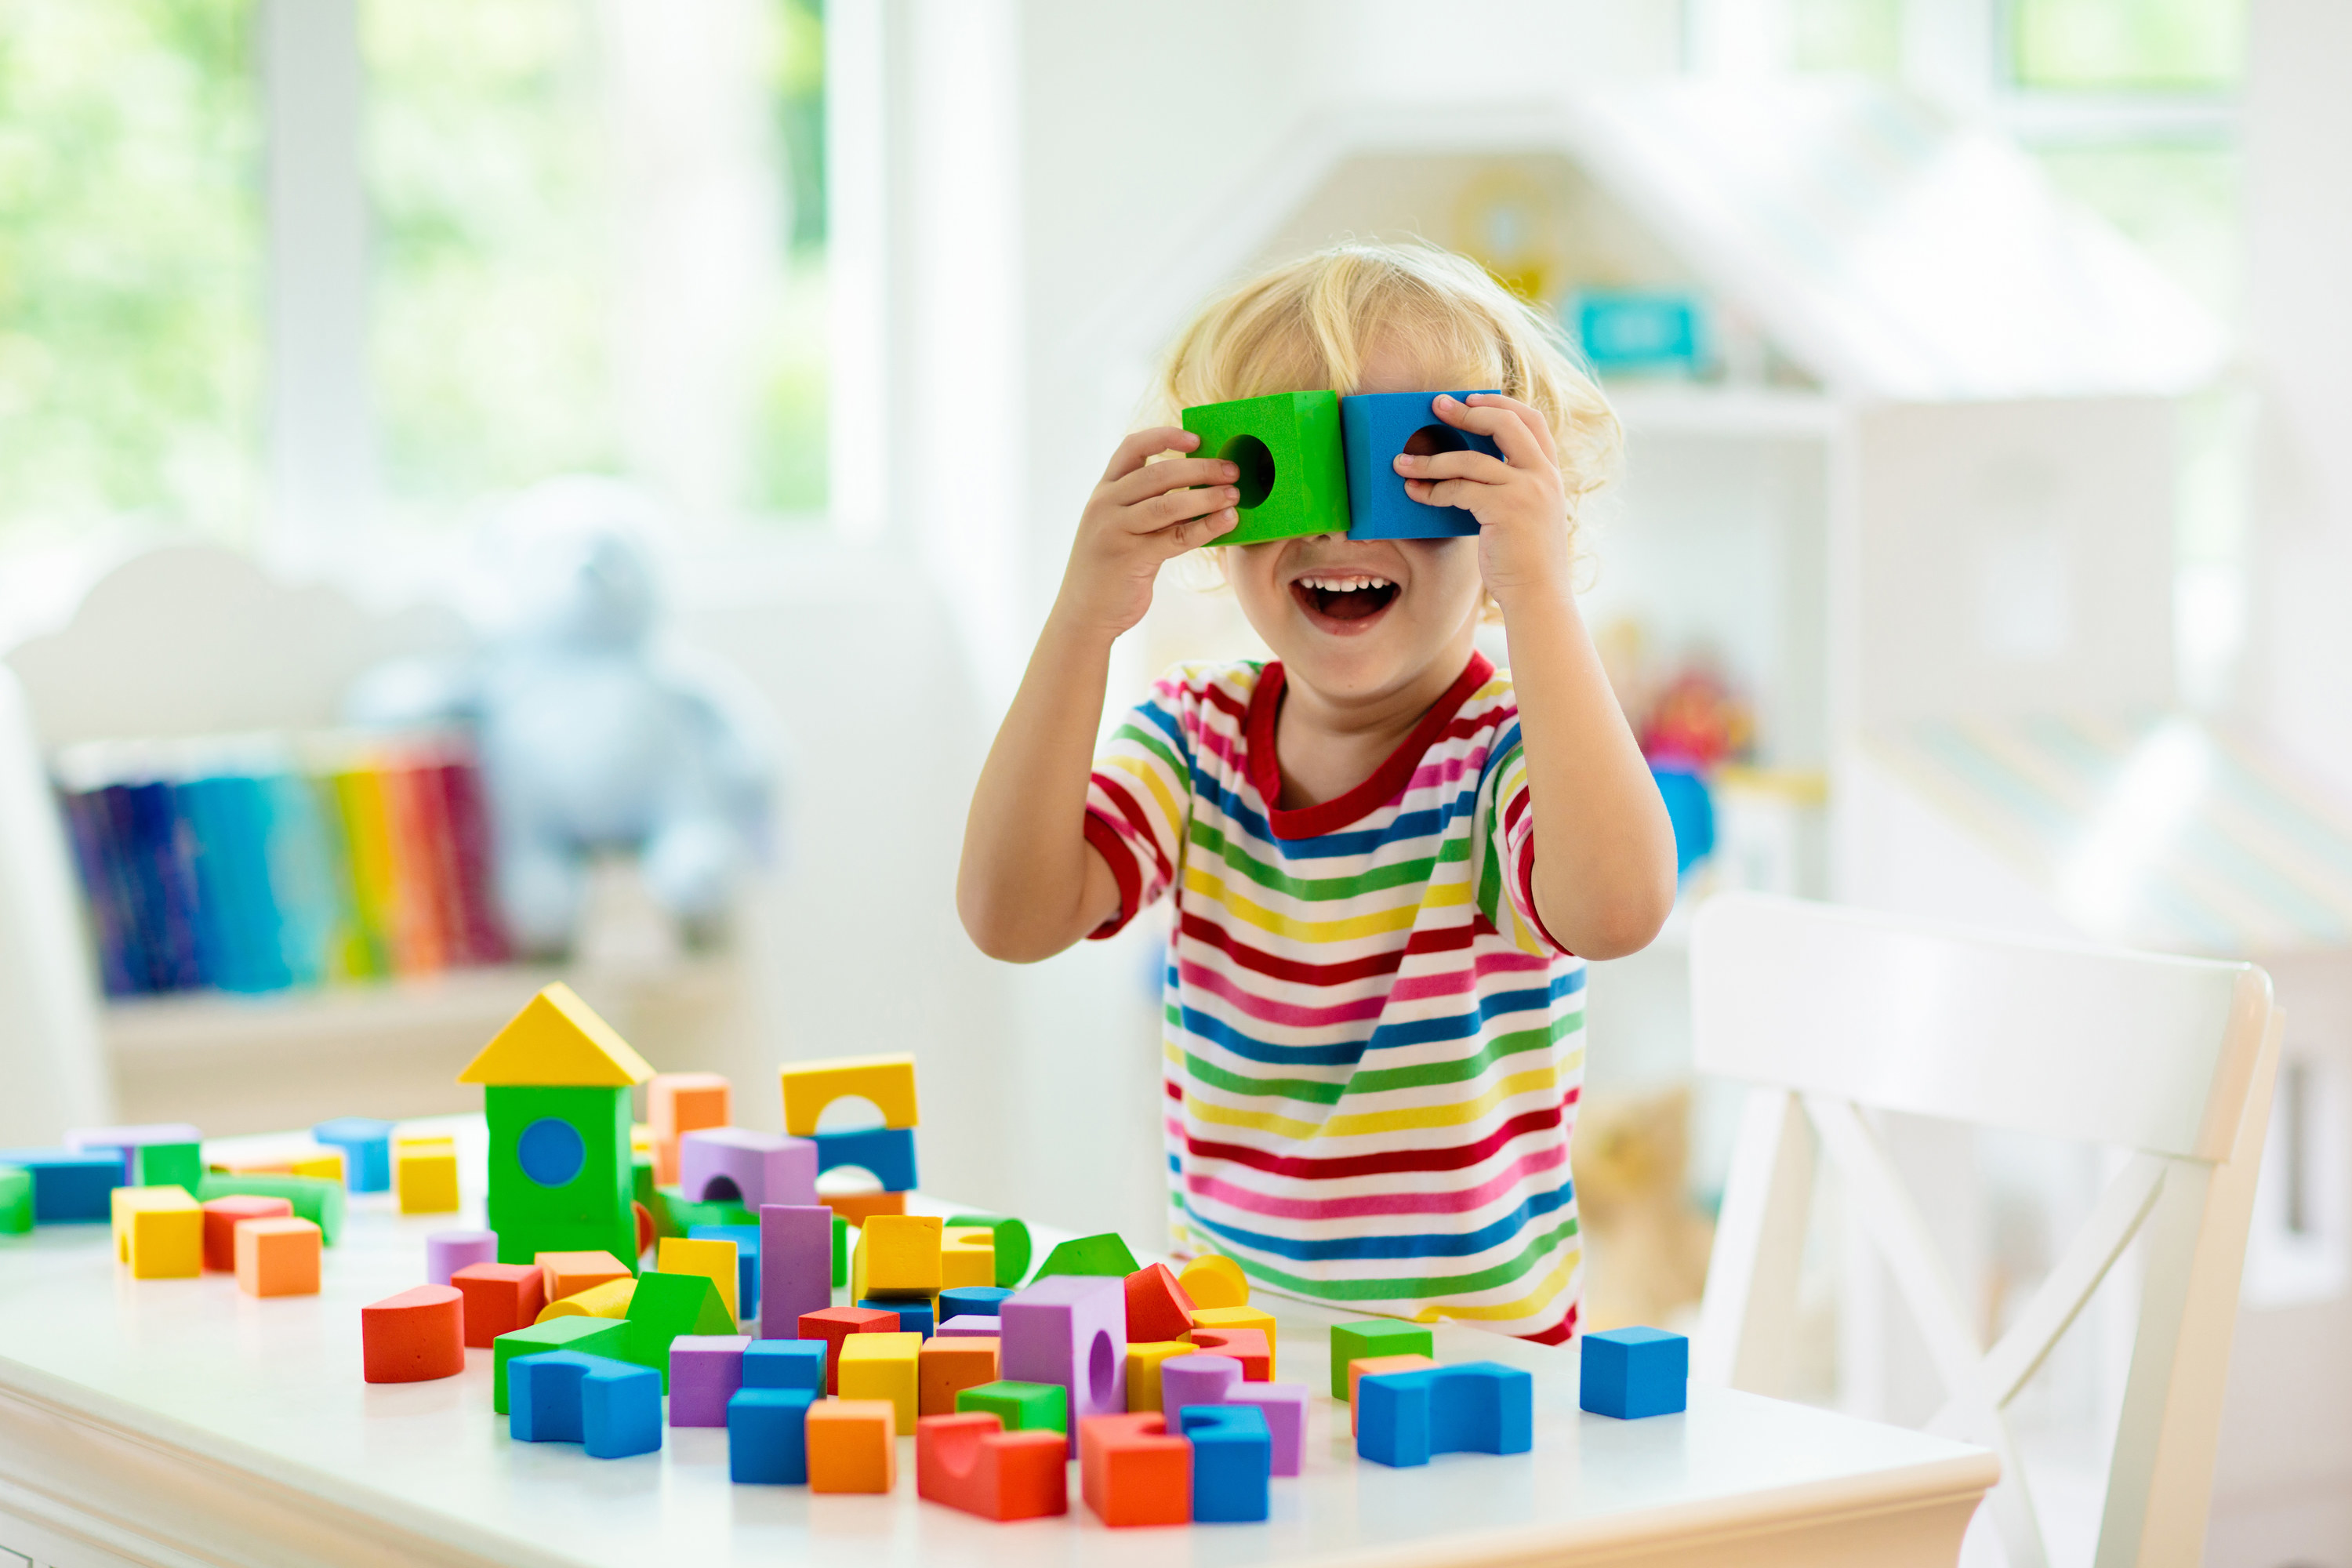 Toddler playing with colorful blocks